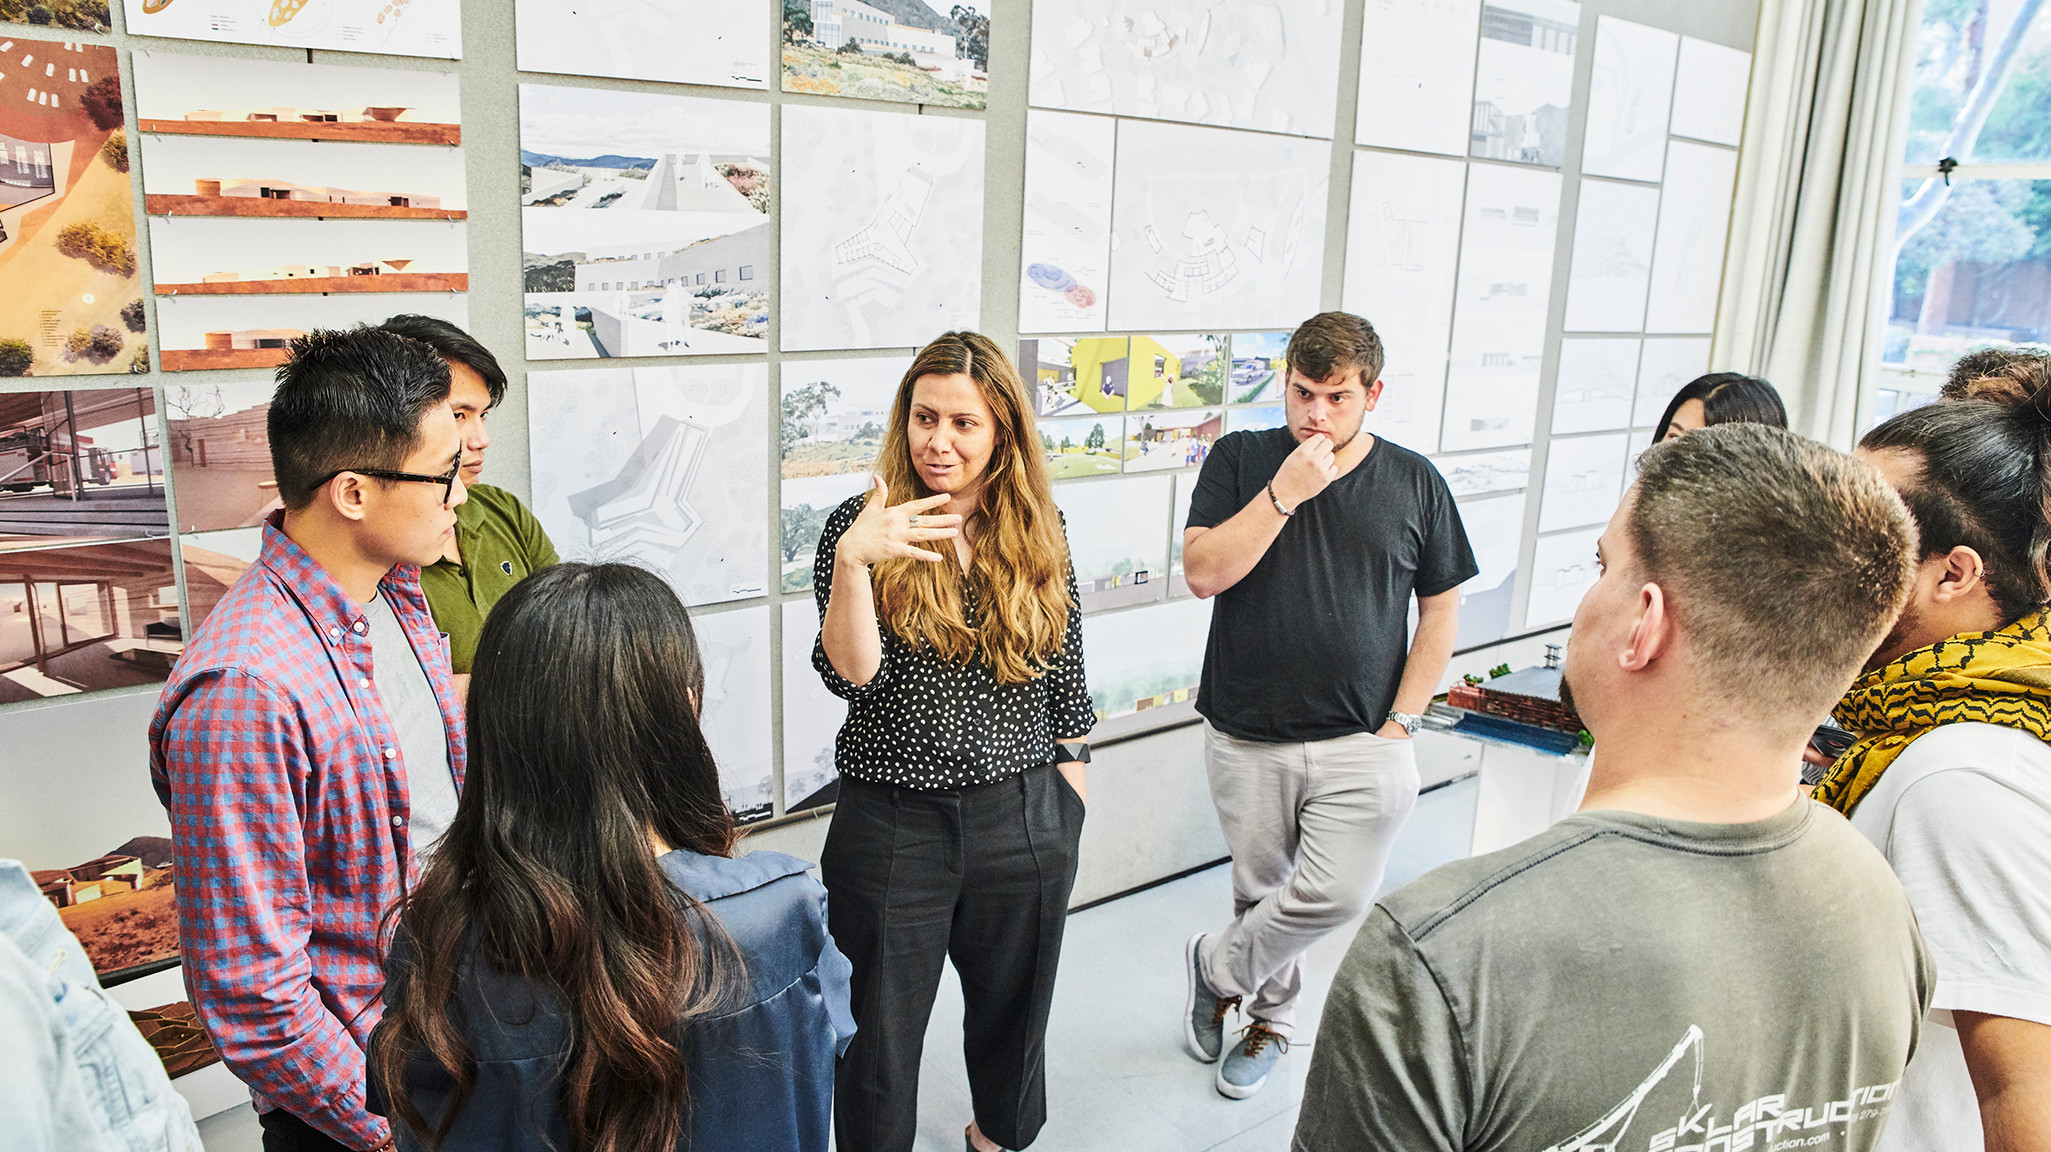 UCLA Architecture and Urban Design Join us for our Graduate Programs